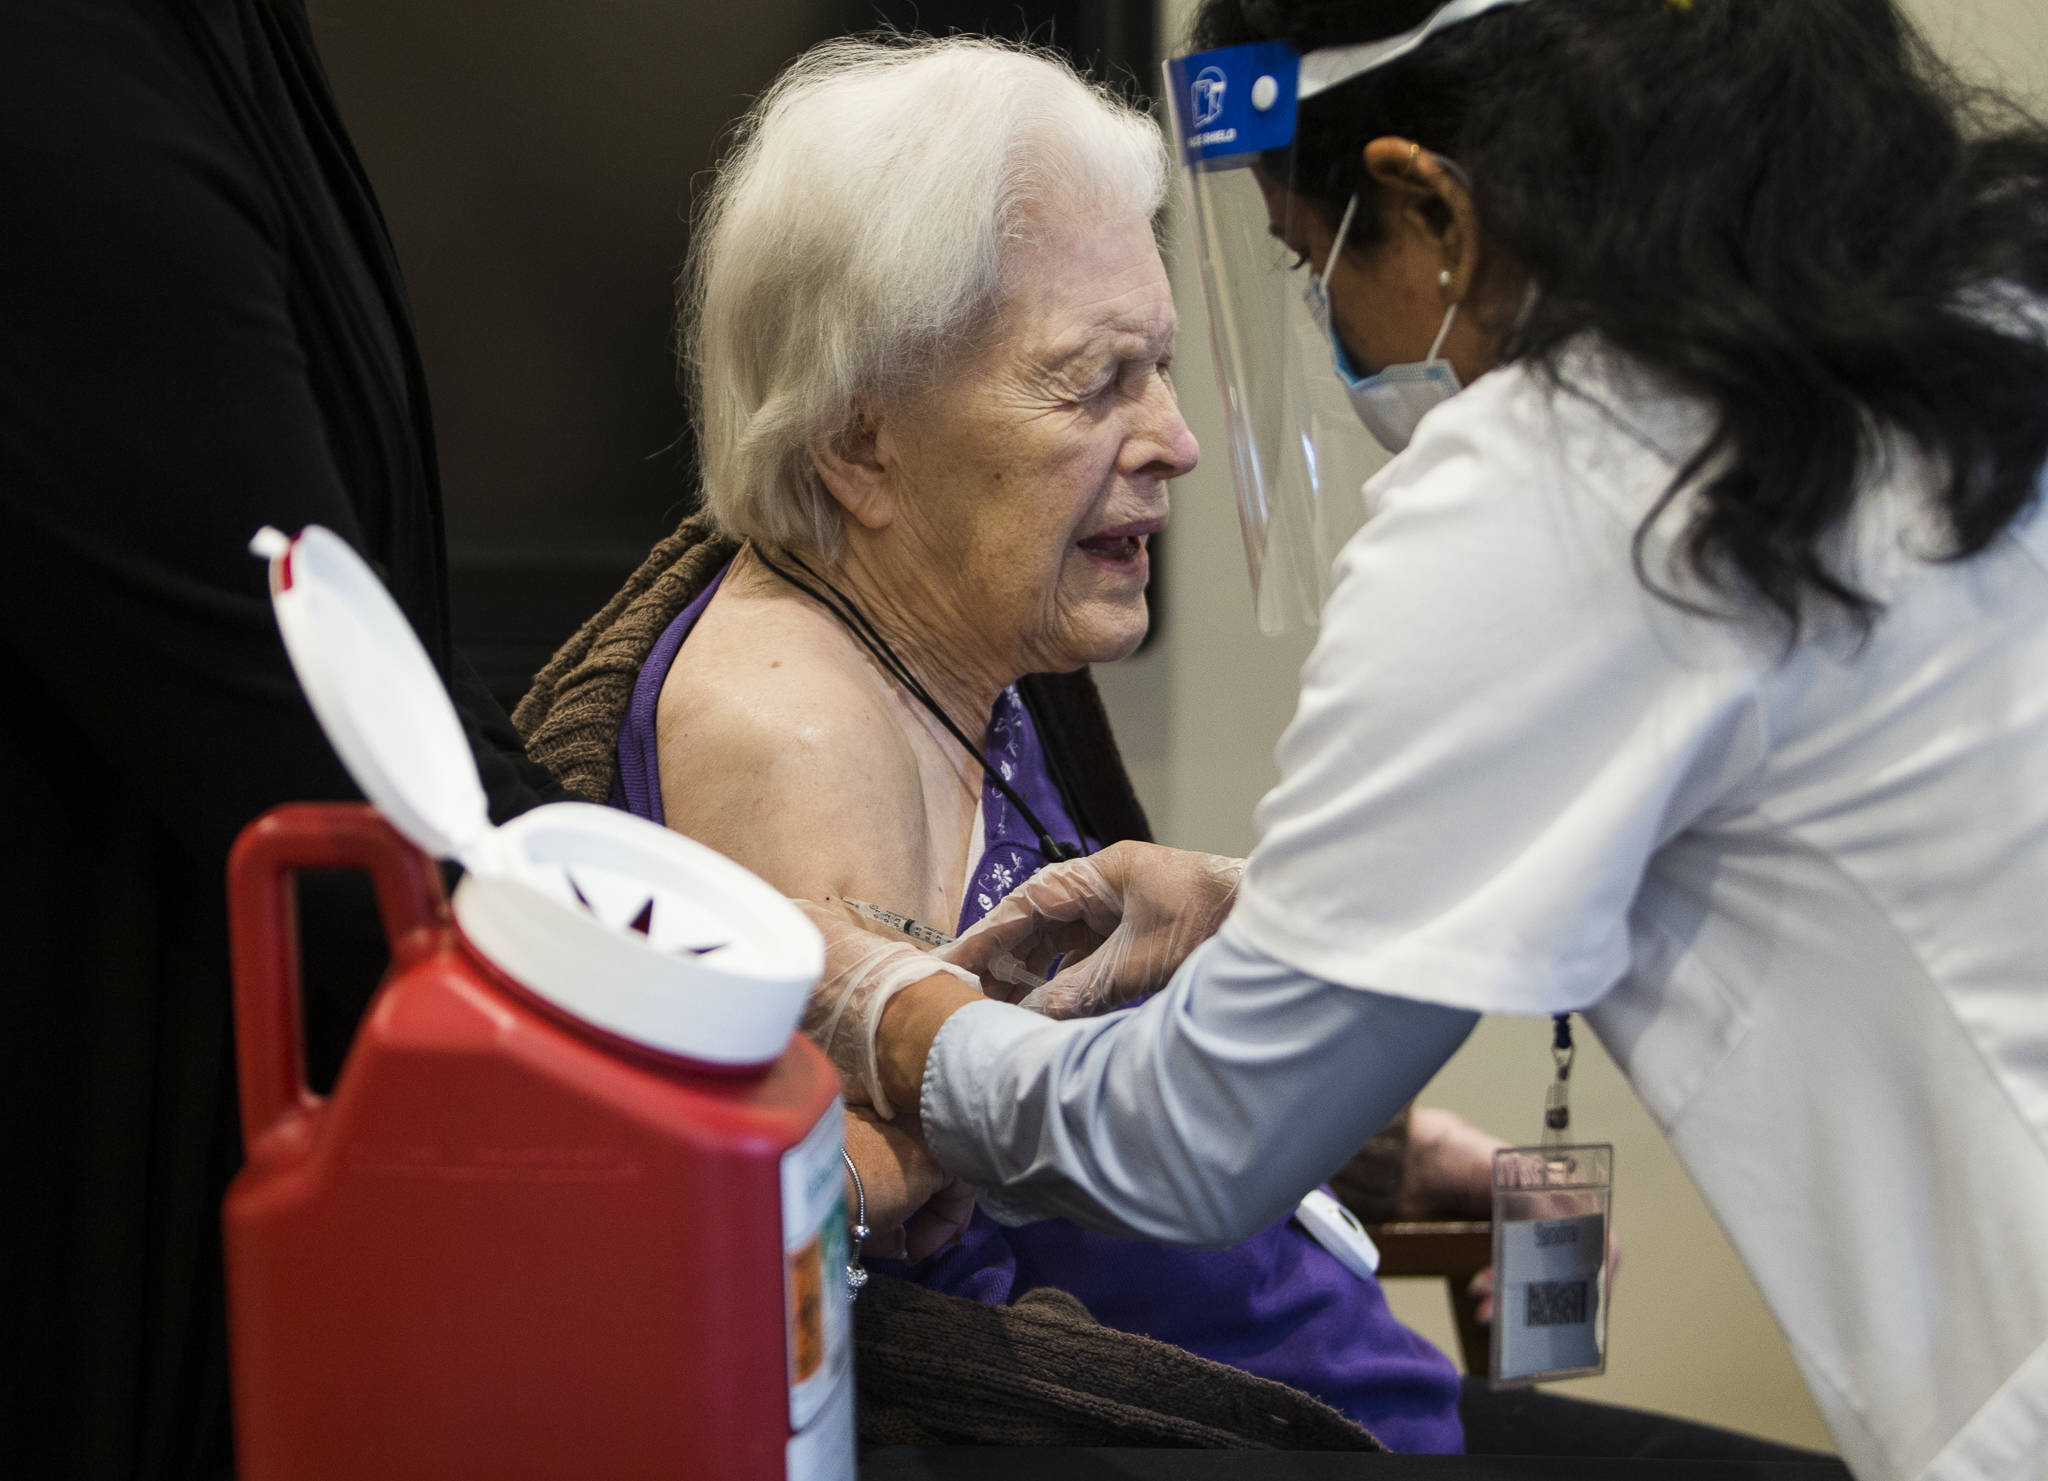 Jackie Hoernor, a resident at South Pointe Assisted Living, winces as she gets her Pfizer COVID-19 vaccination during a Walgreen’s Vaccine Clinic at South Pointe on Feb. 12 in Everett. (Olivia Vanni / The Herald)